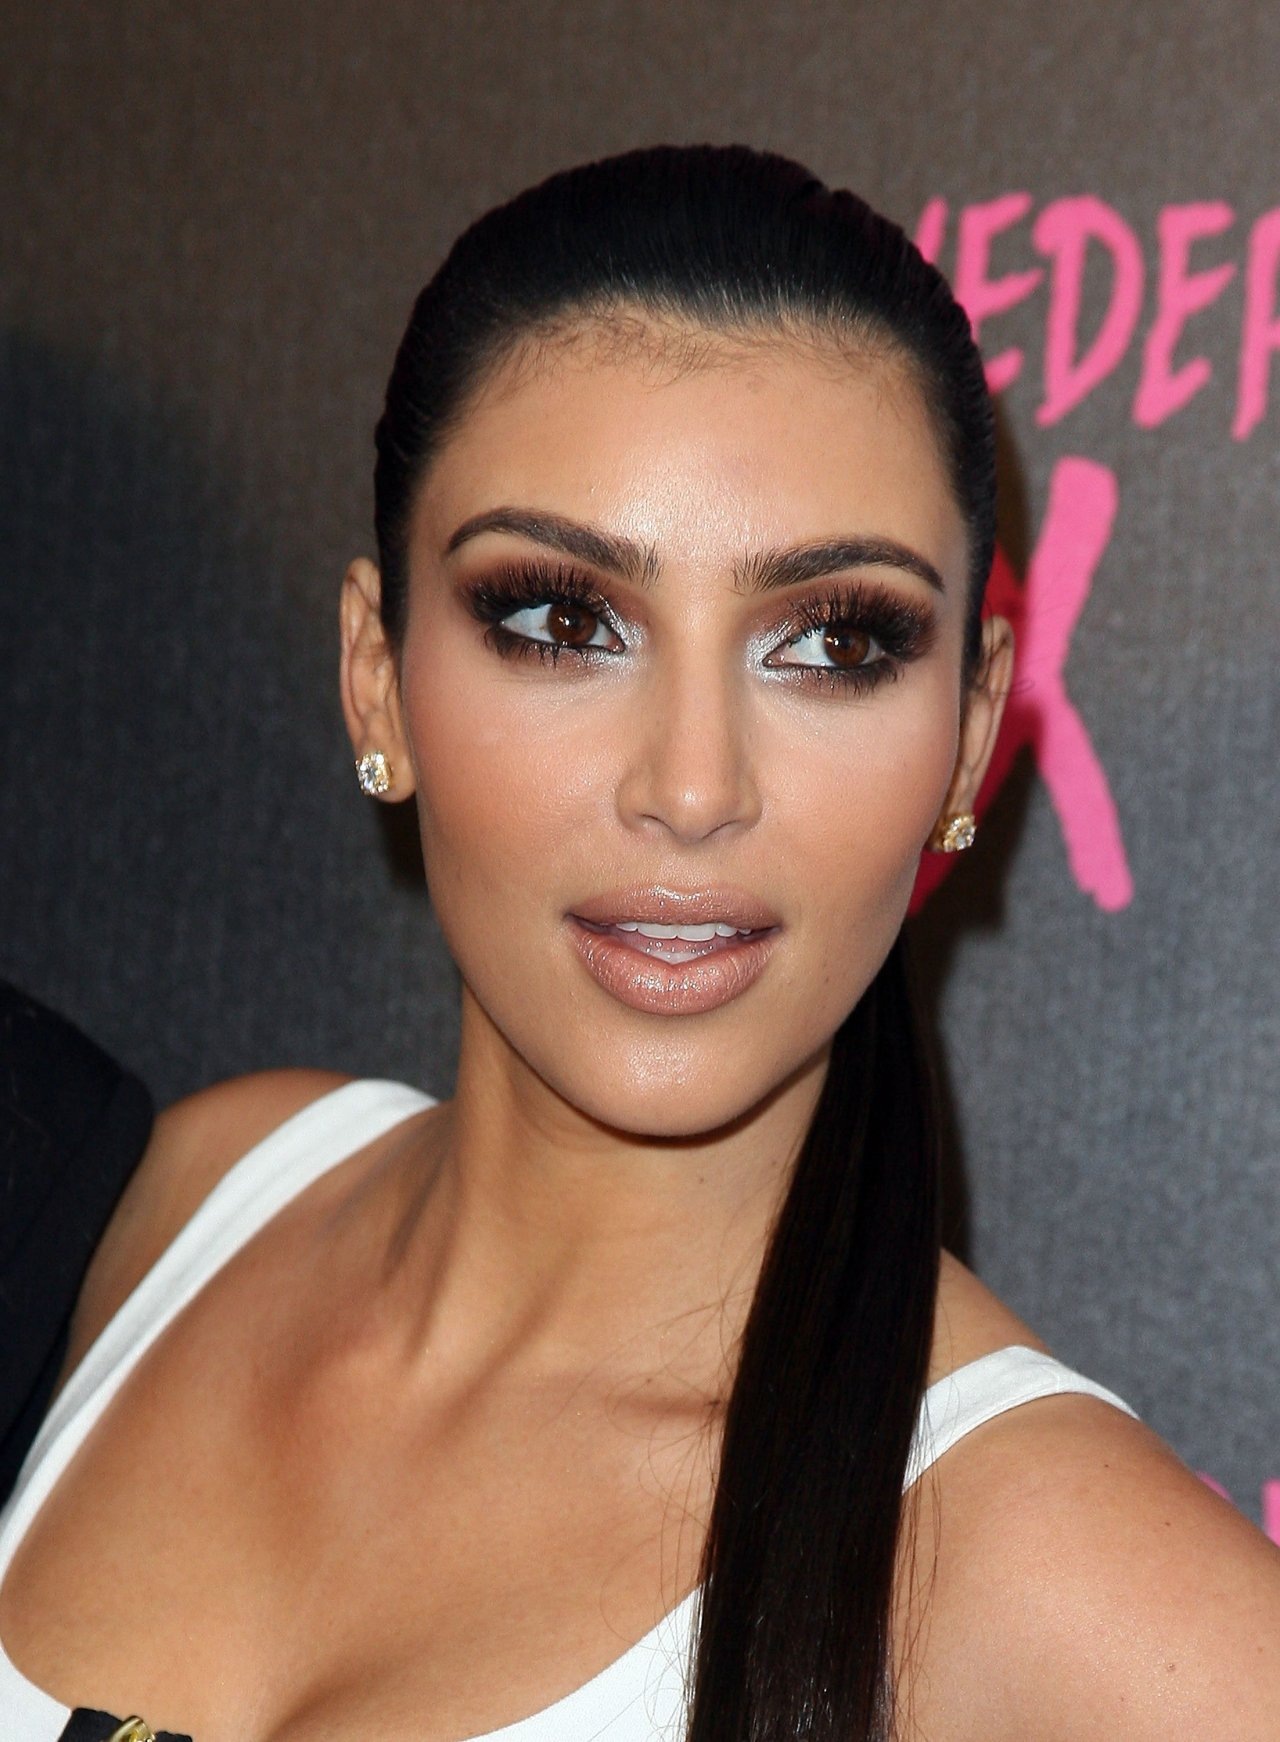 the-internet-needs-to-stop-victim-blaming-kim-kardashian-and-here-is-why-008